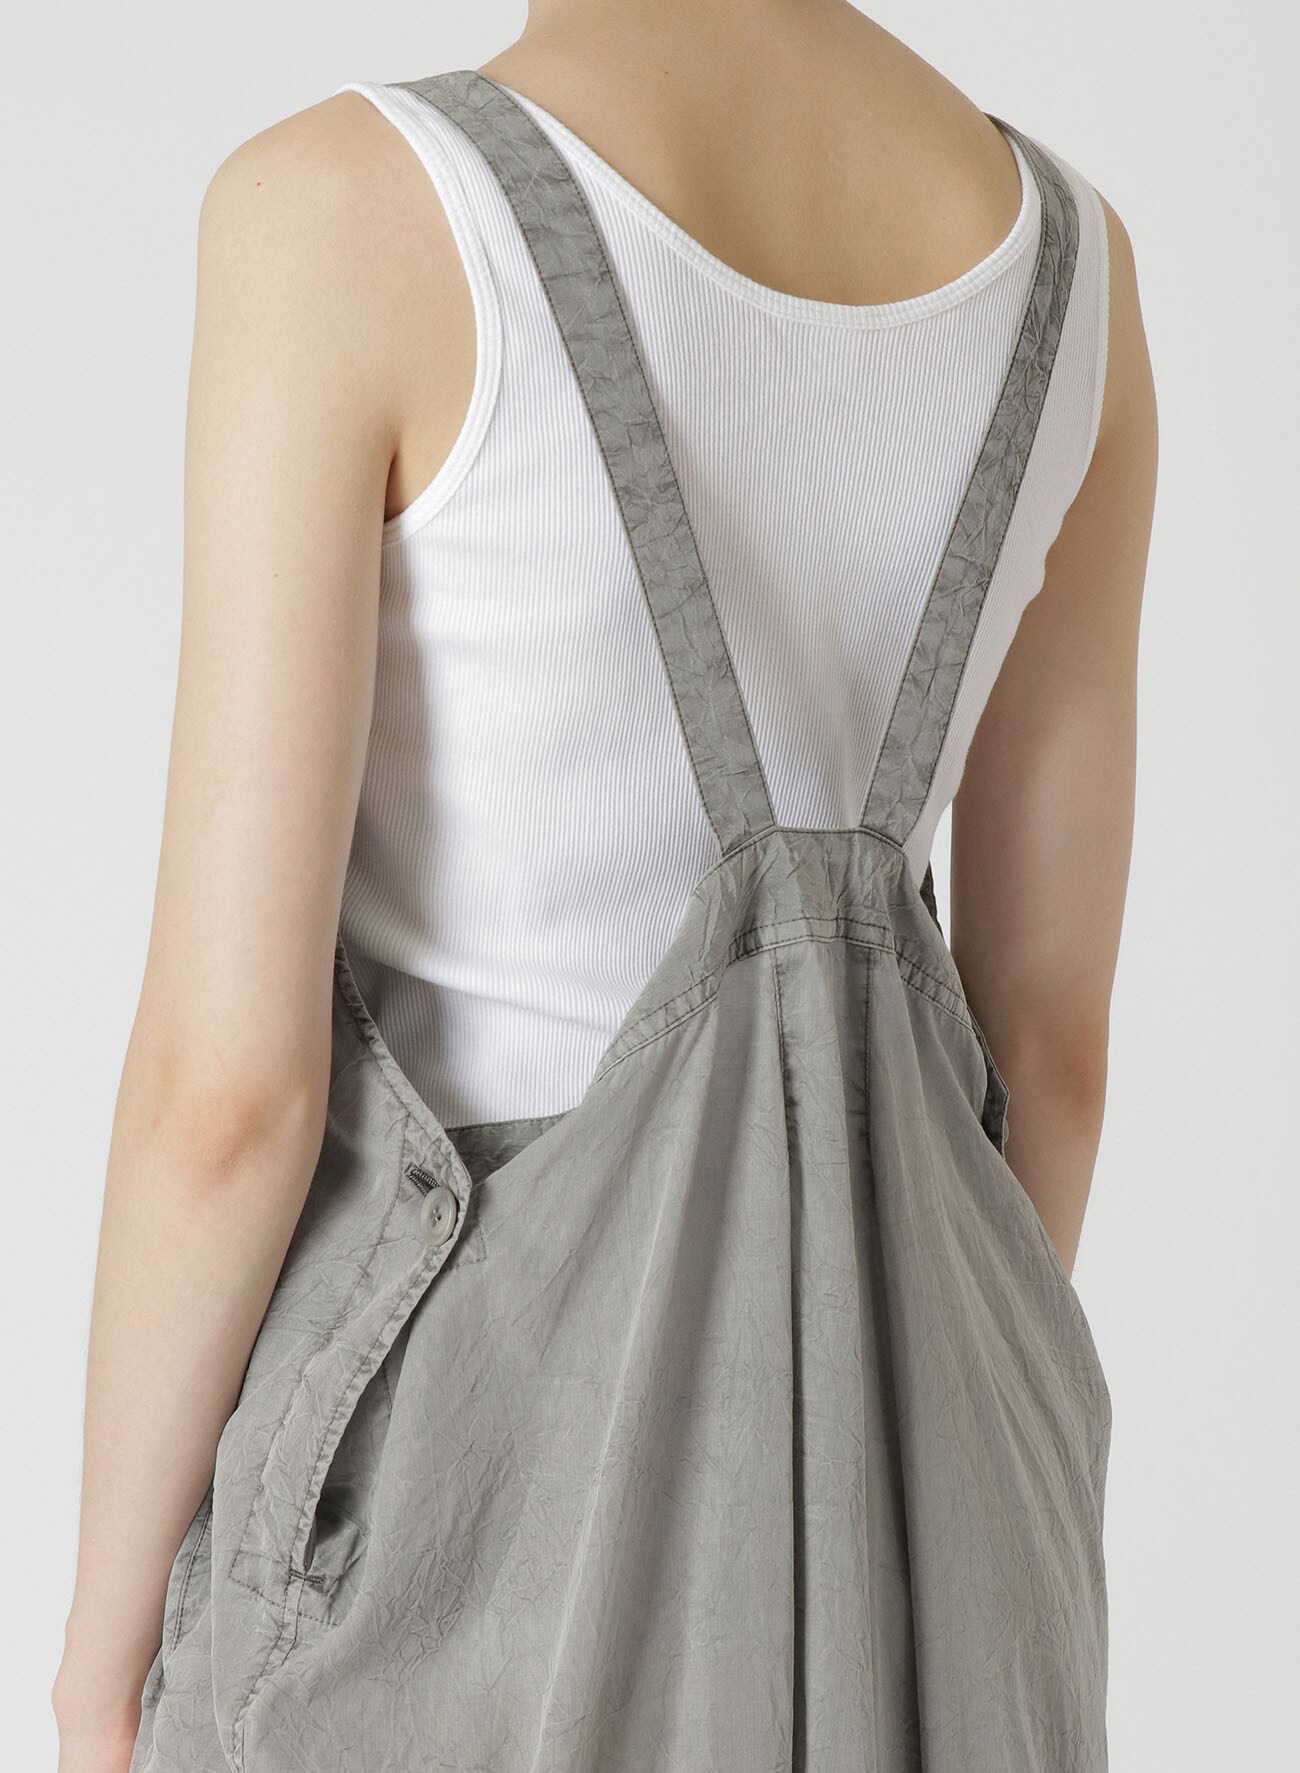 CUPRA COTTON PIGMENT-DYED WRINKLED LAWN OVERALLS